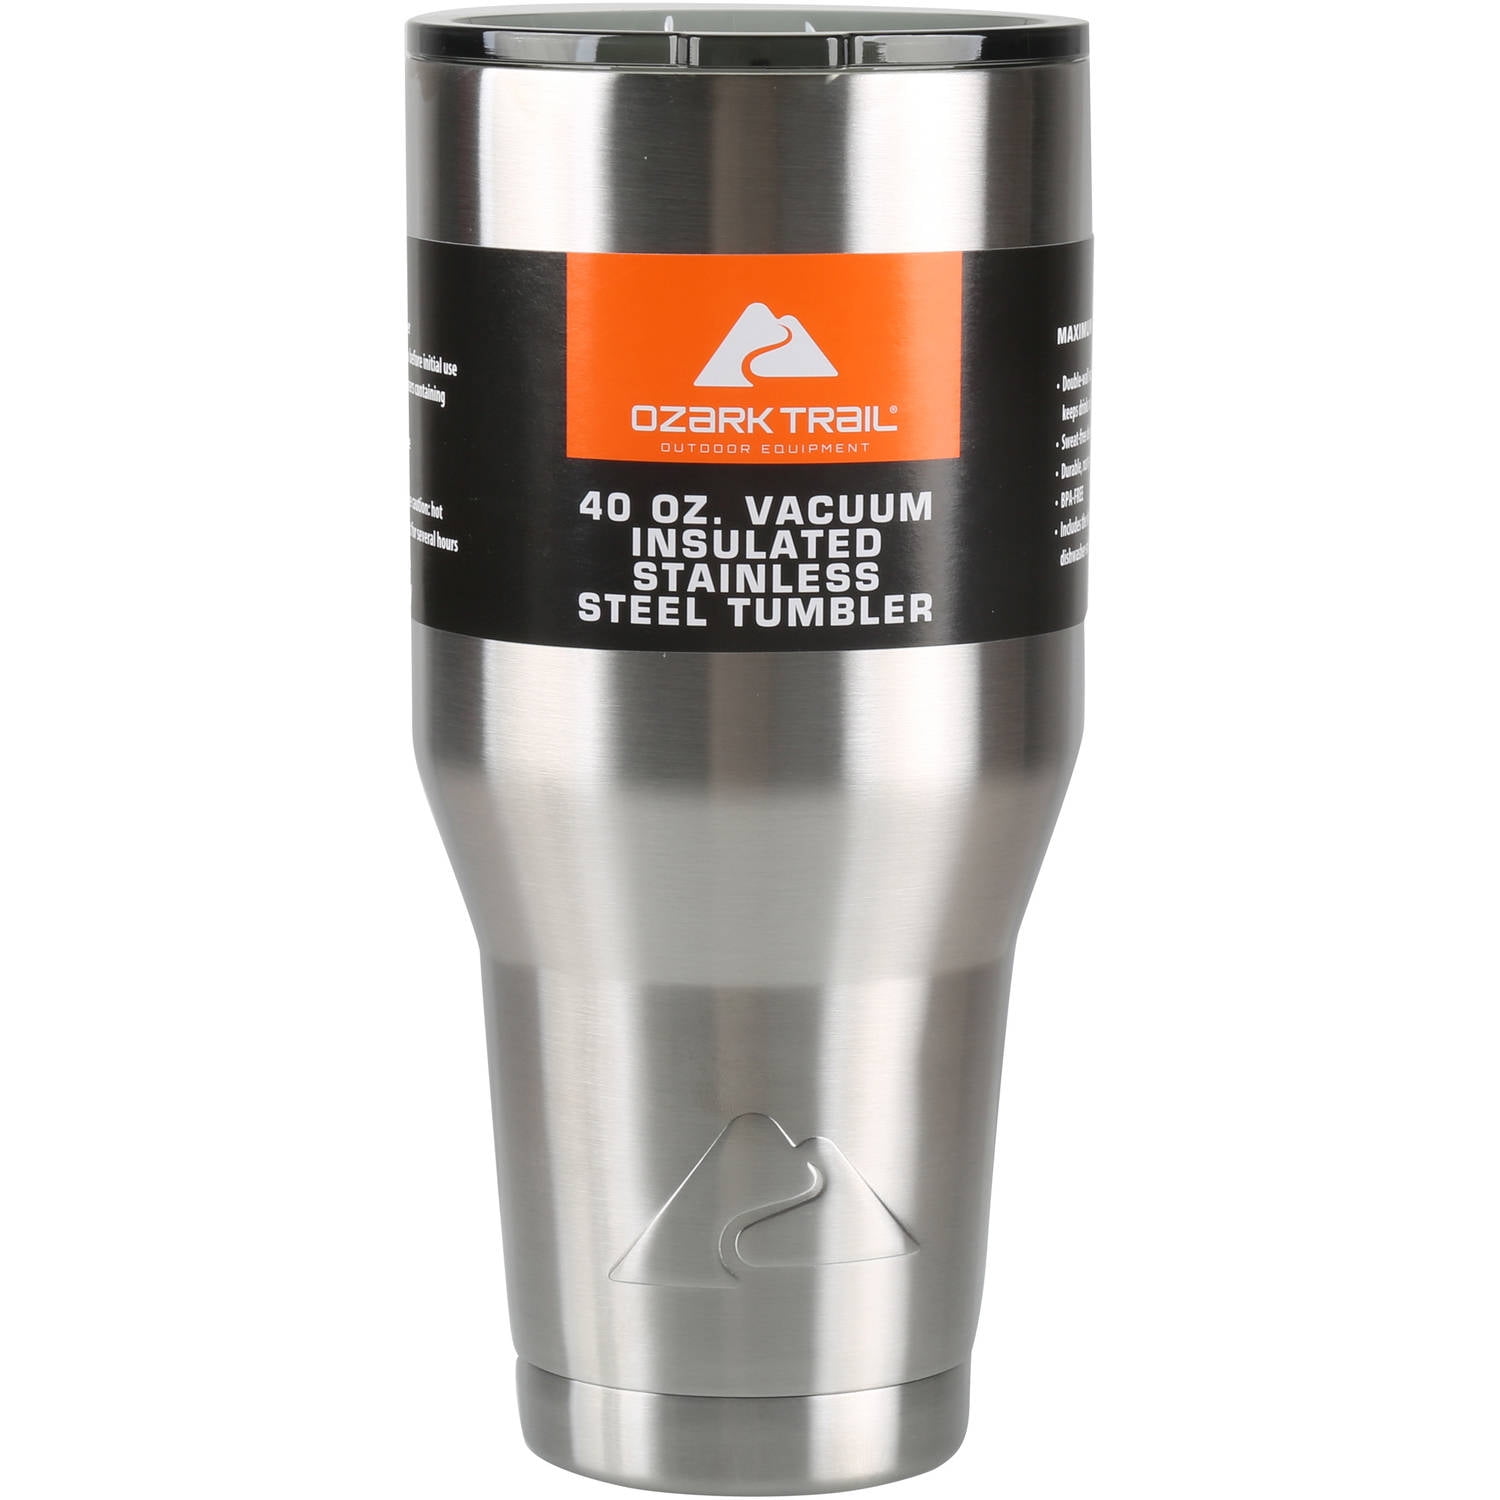 40 Oz Vacuum Insulated Stainless Steel Tumbler